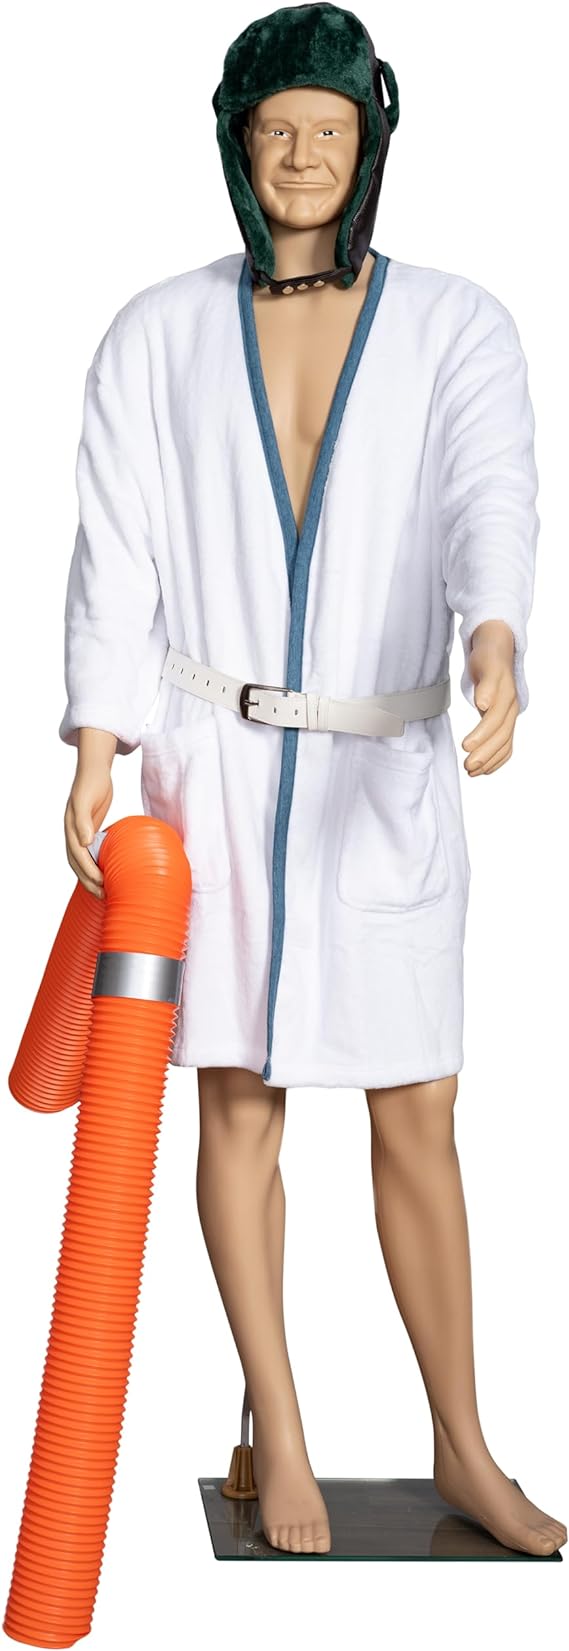 6 feet Tall Mannequin with Robe Belt Hat